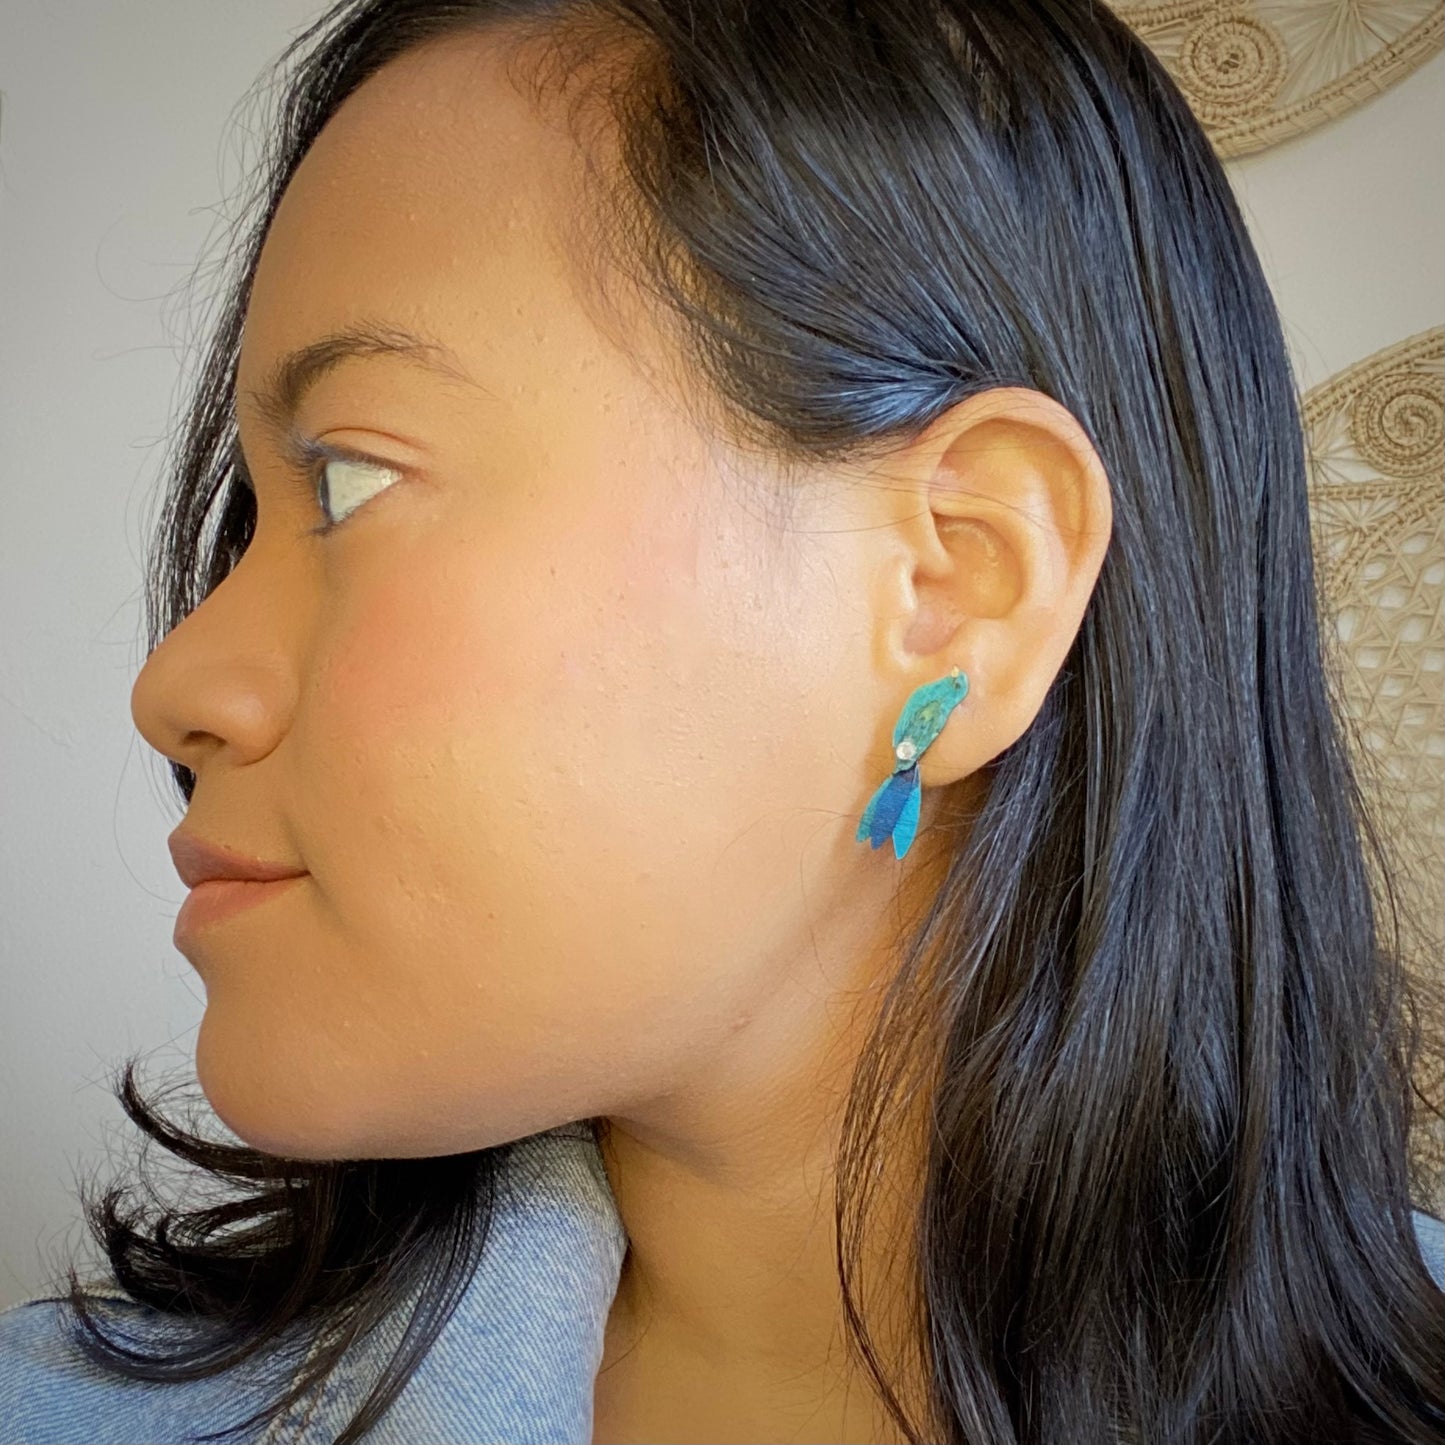 Blue Bird earrings small posts.  Handmade in Colombia. 